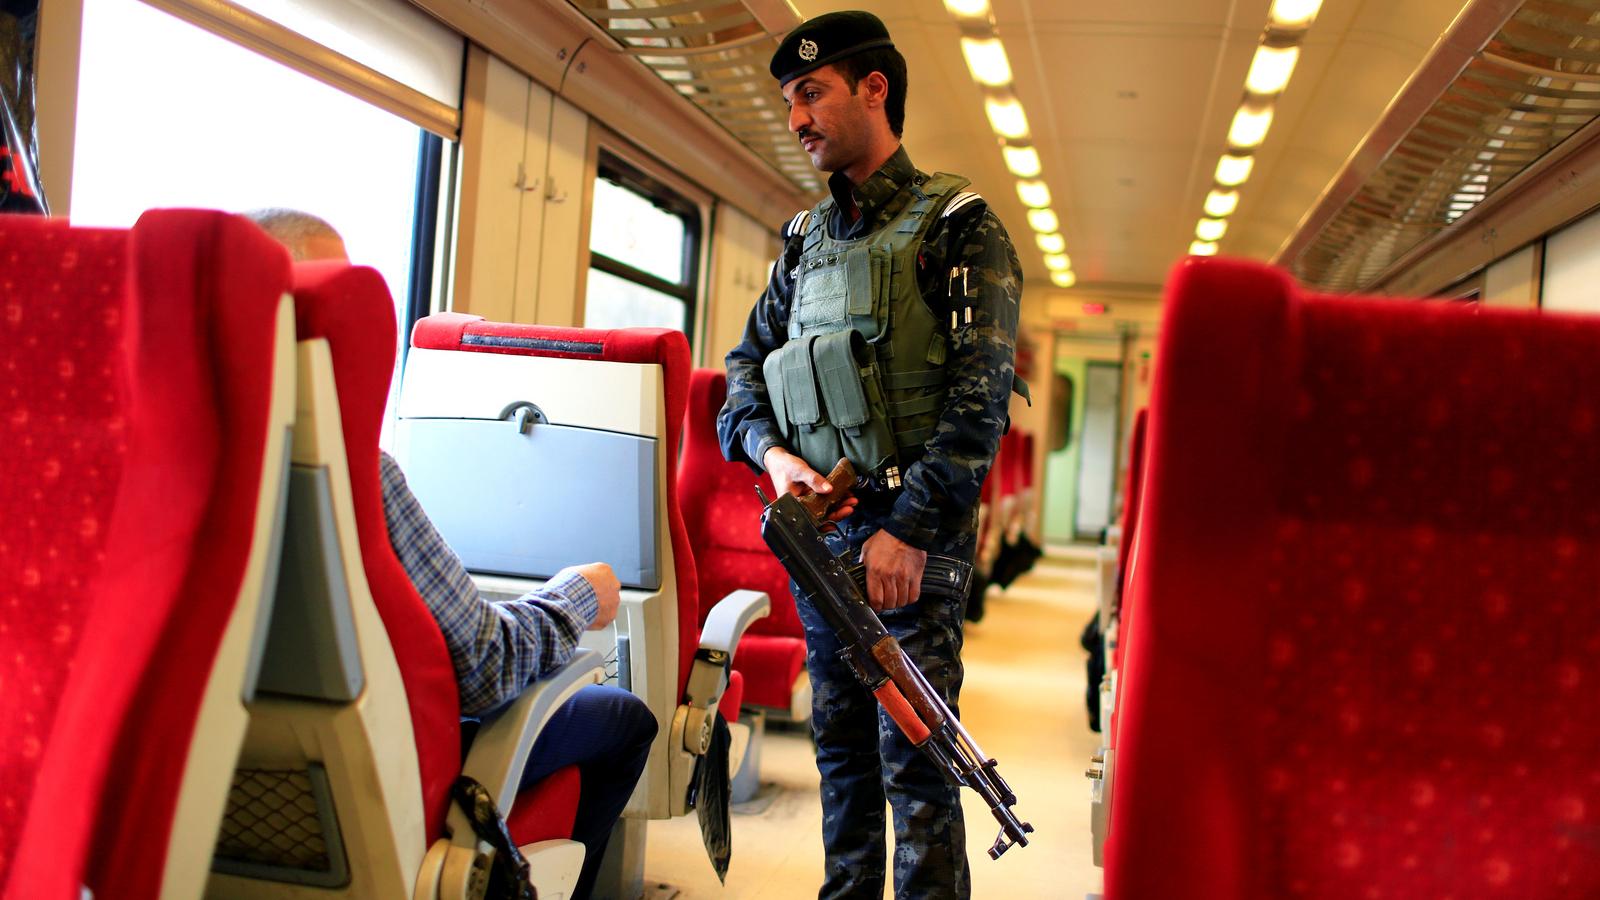 An Iraqi policeman stands guard in a passenger cabin with red seats on the way to Fallujah.